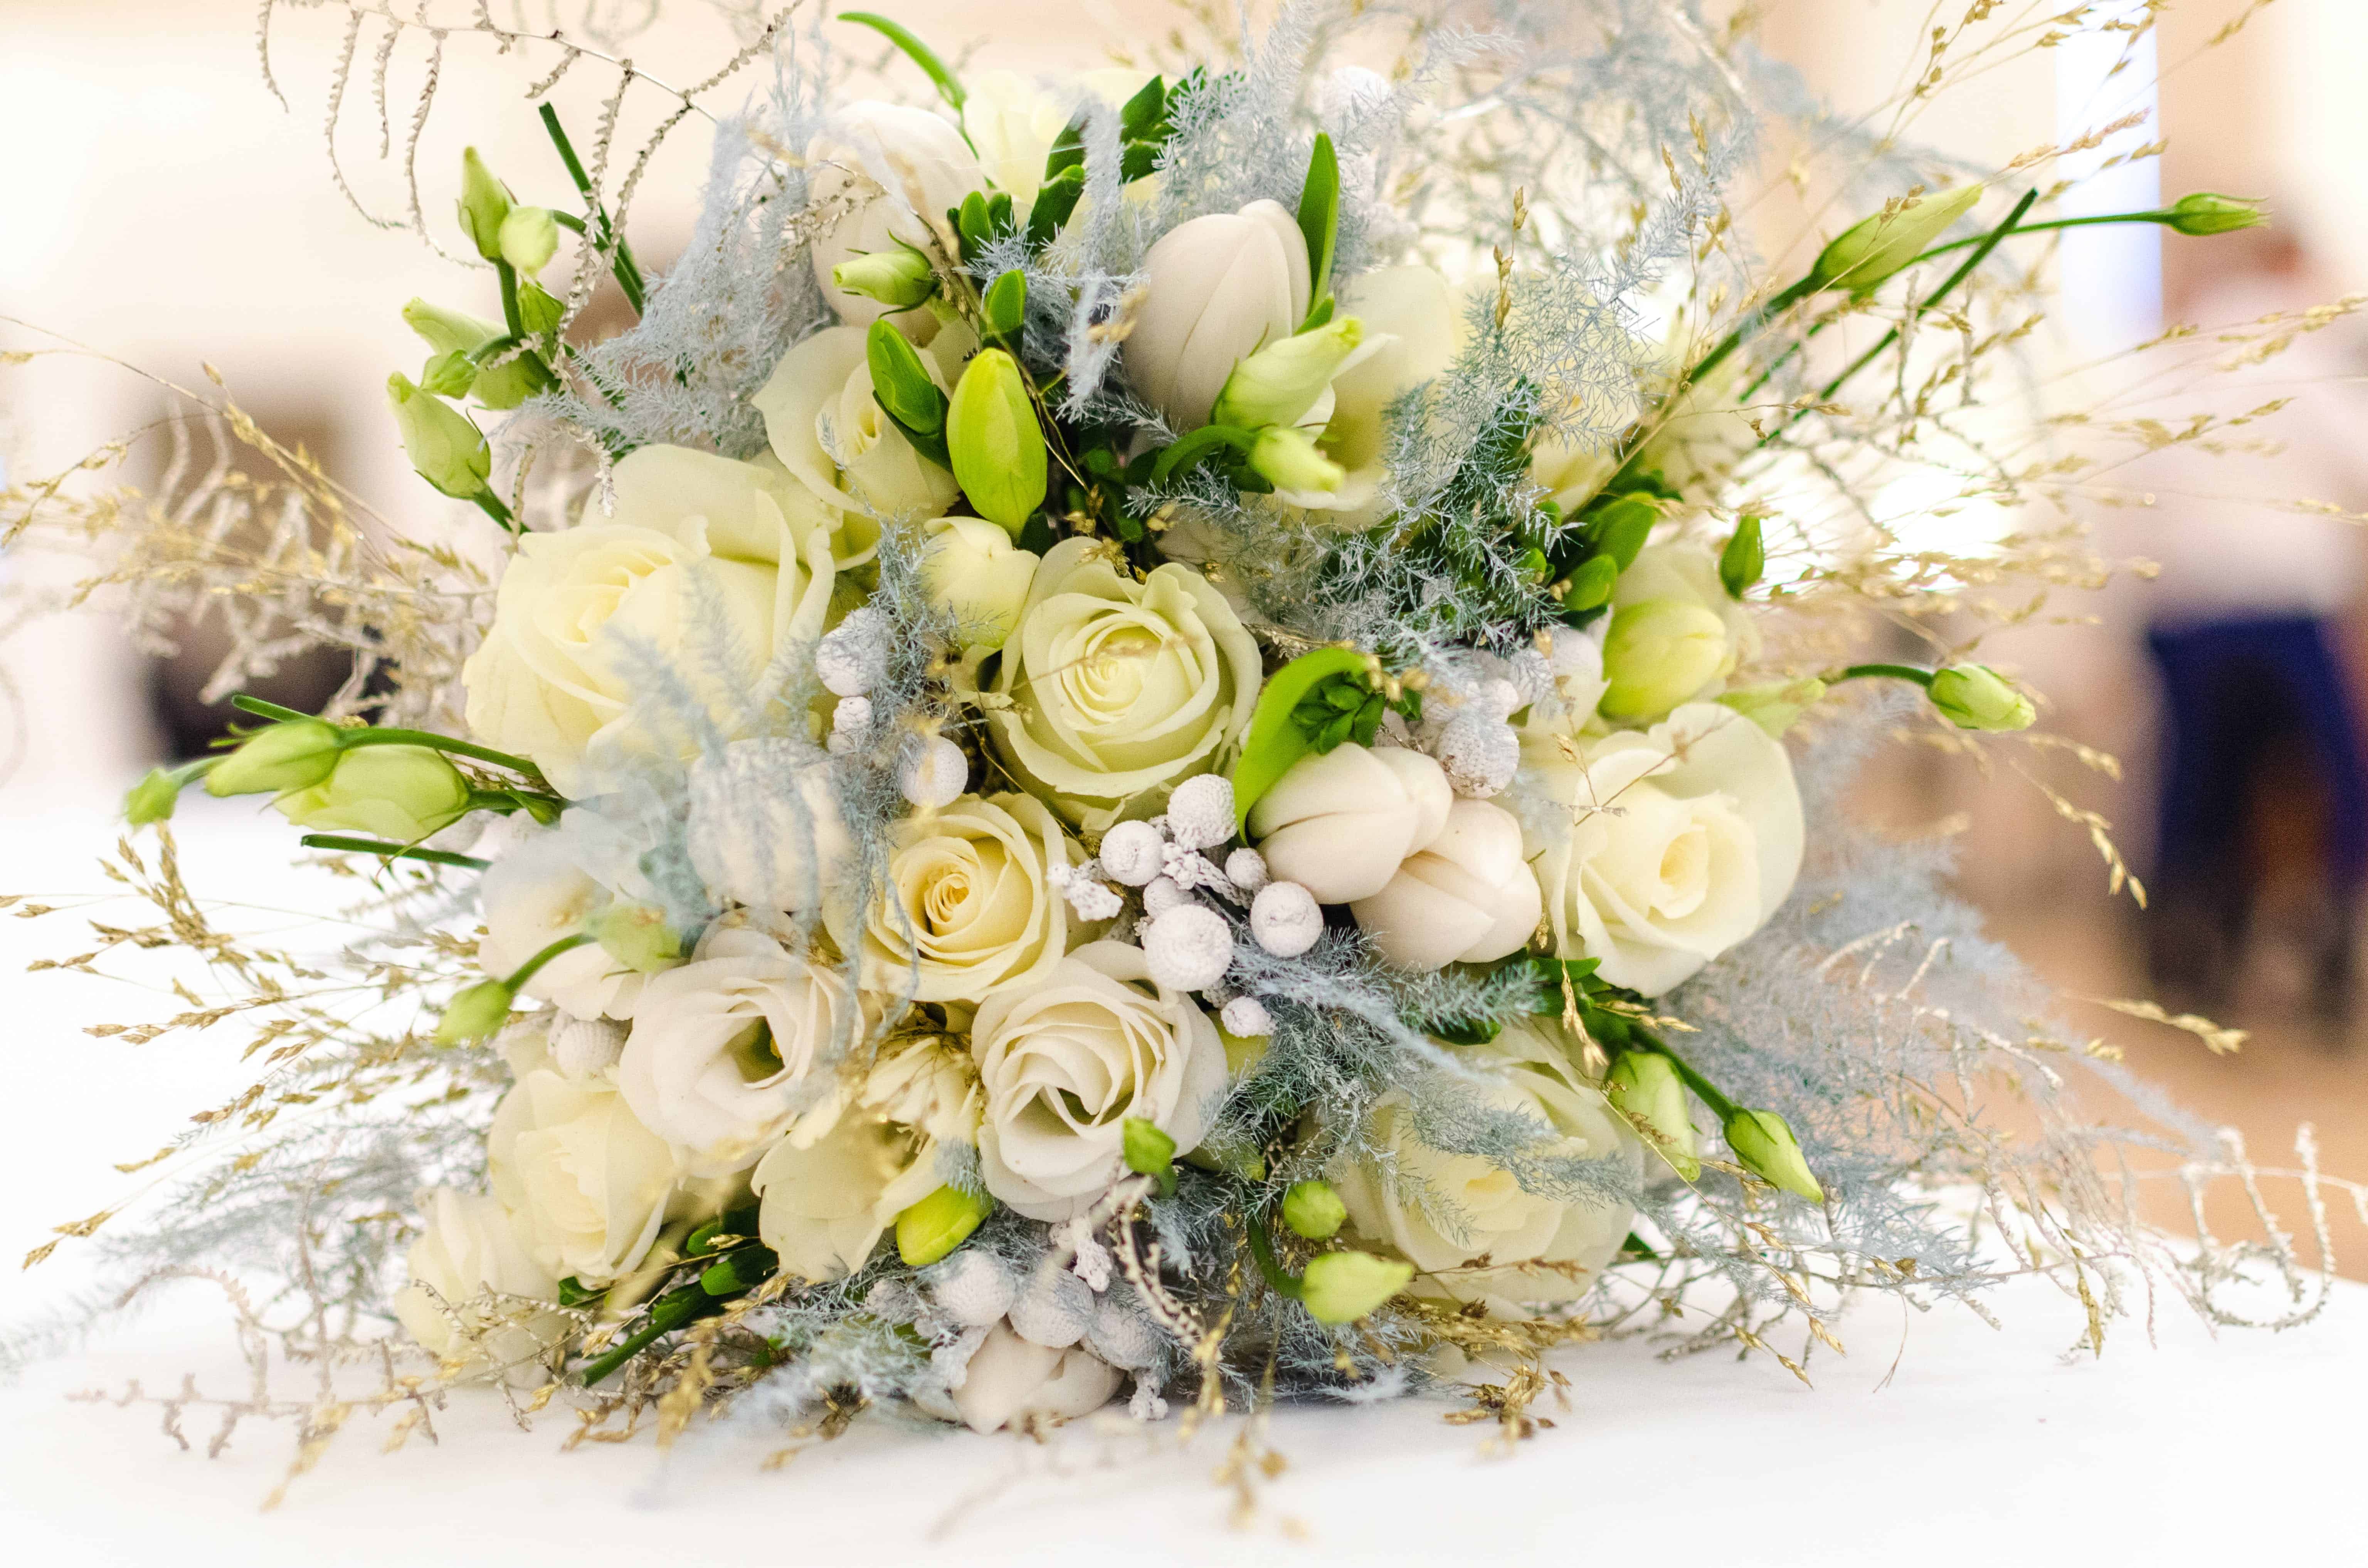 Bouquet of White Roses on Table